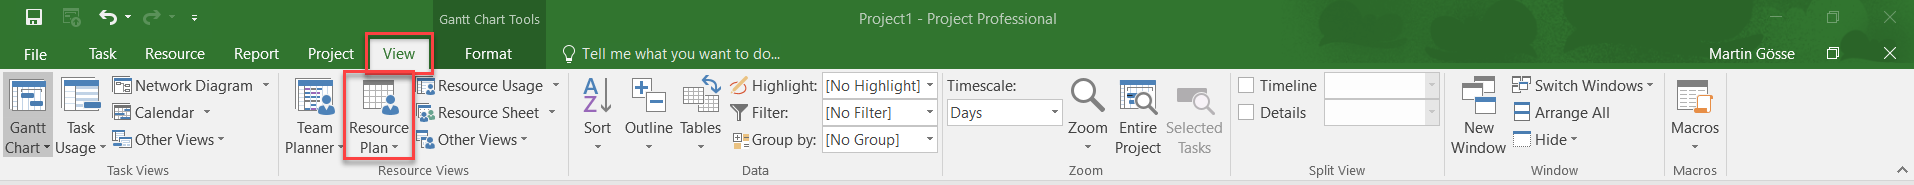 Using Resource Engagements in MS Project 2016 3